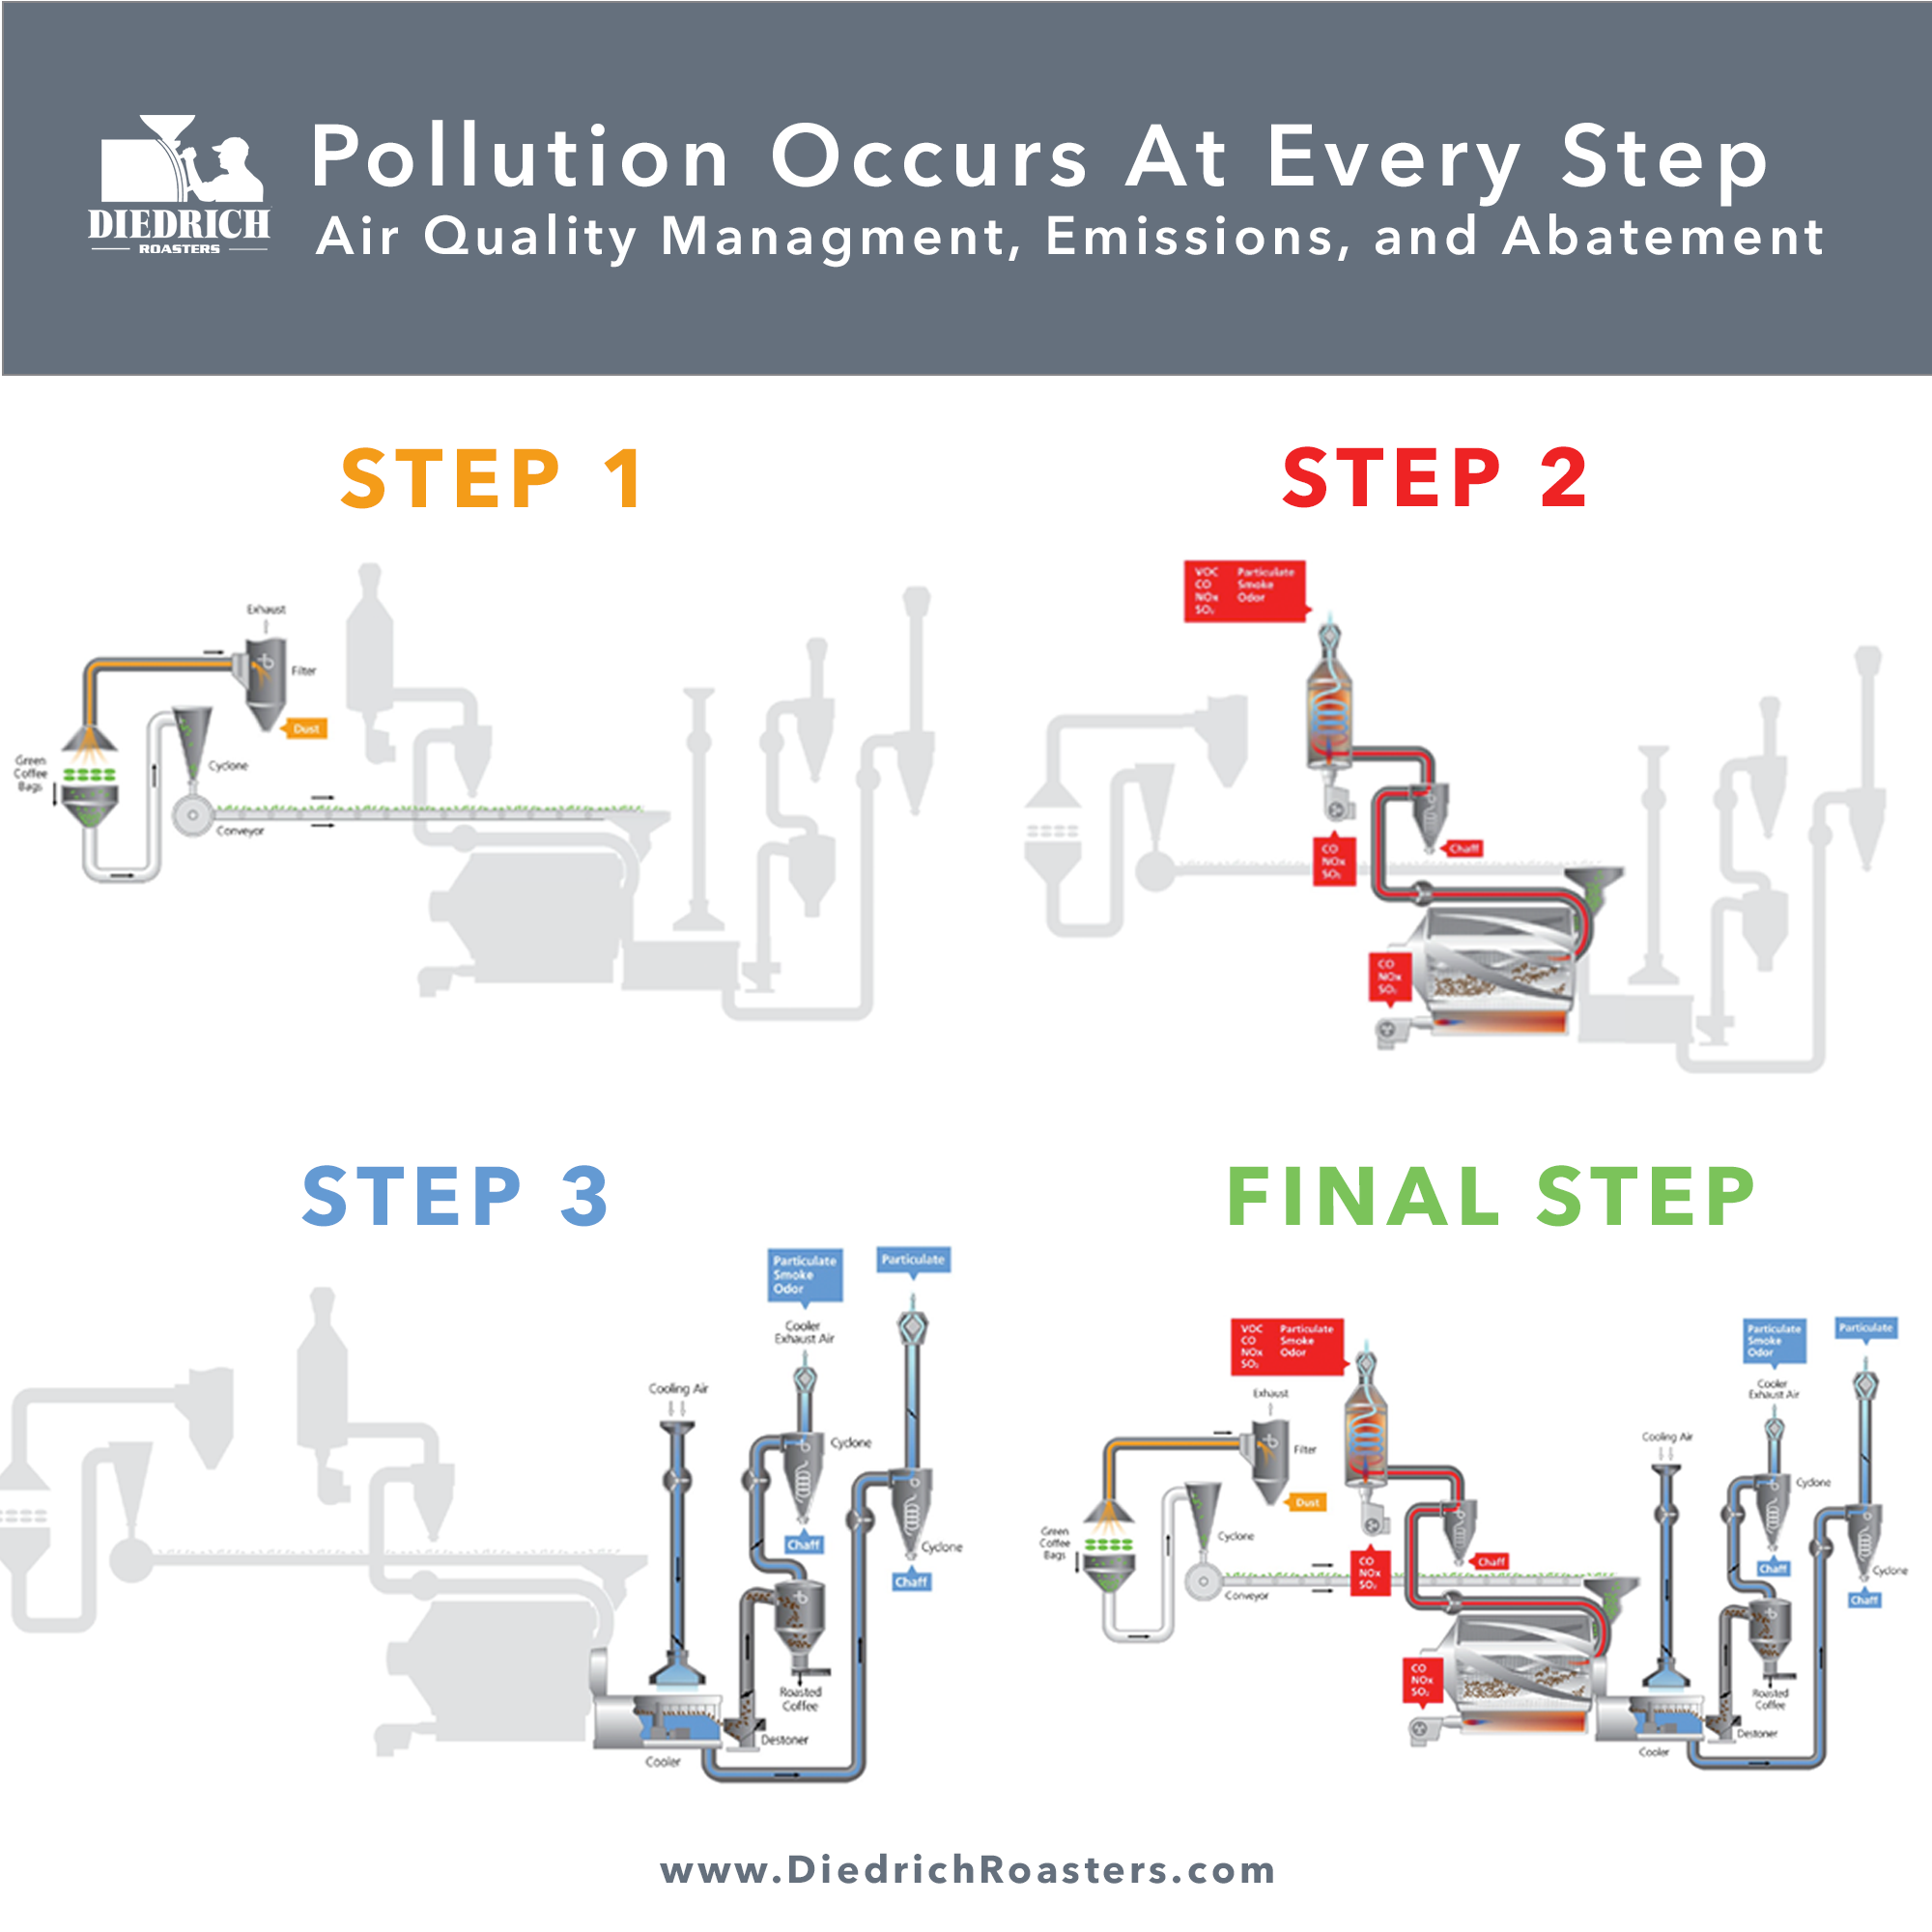 Air Quality Management for Coffee Roasters: Pollution Occurs at Every Step